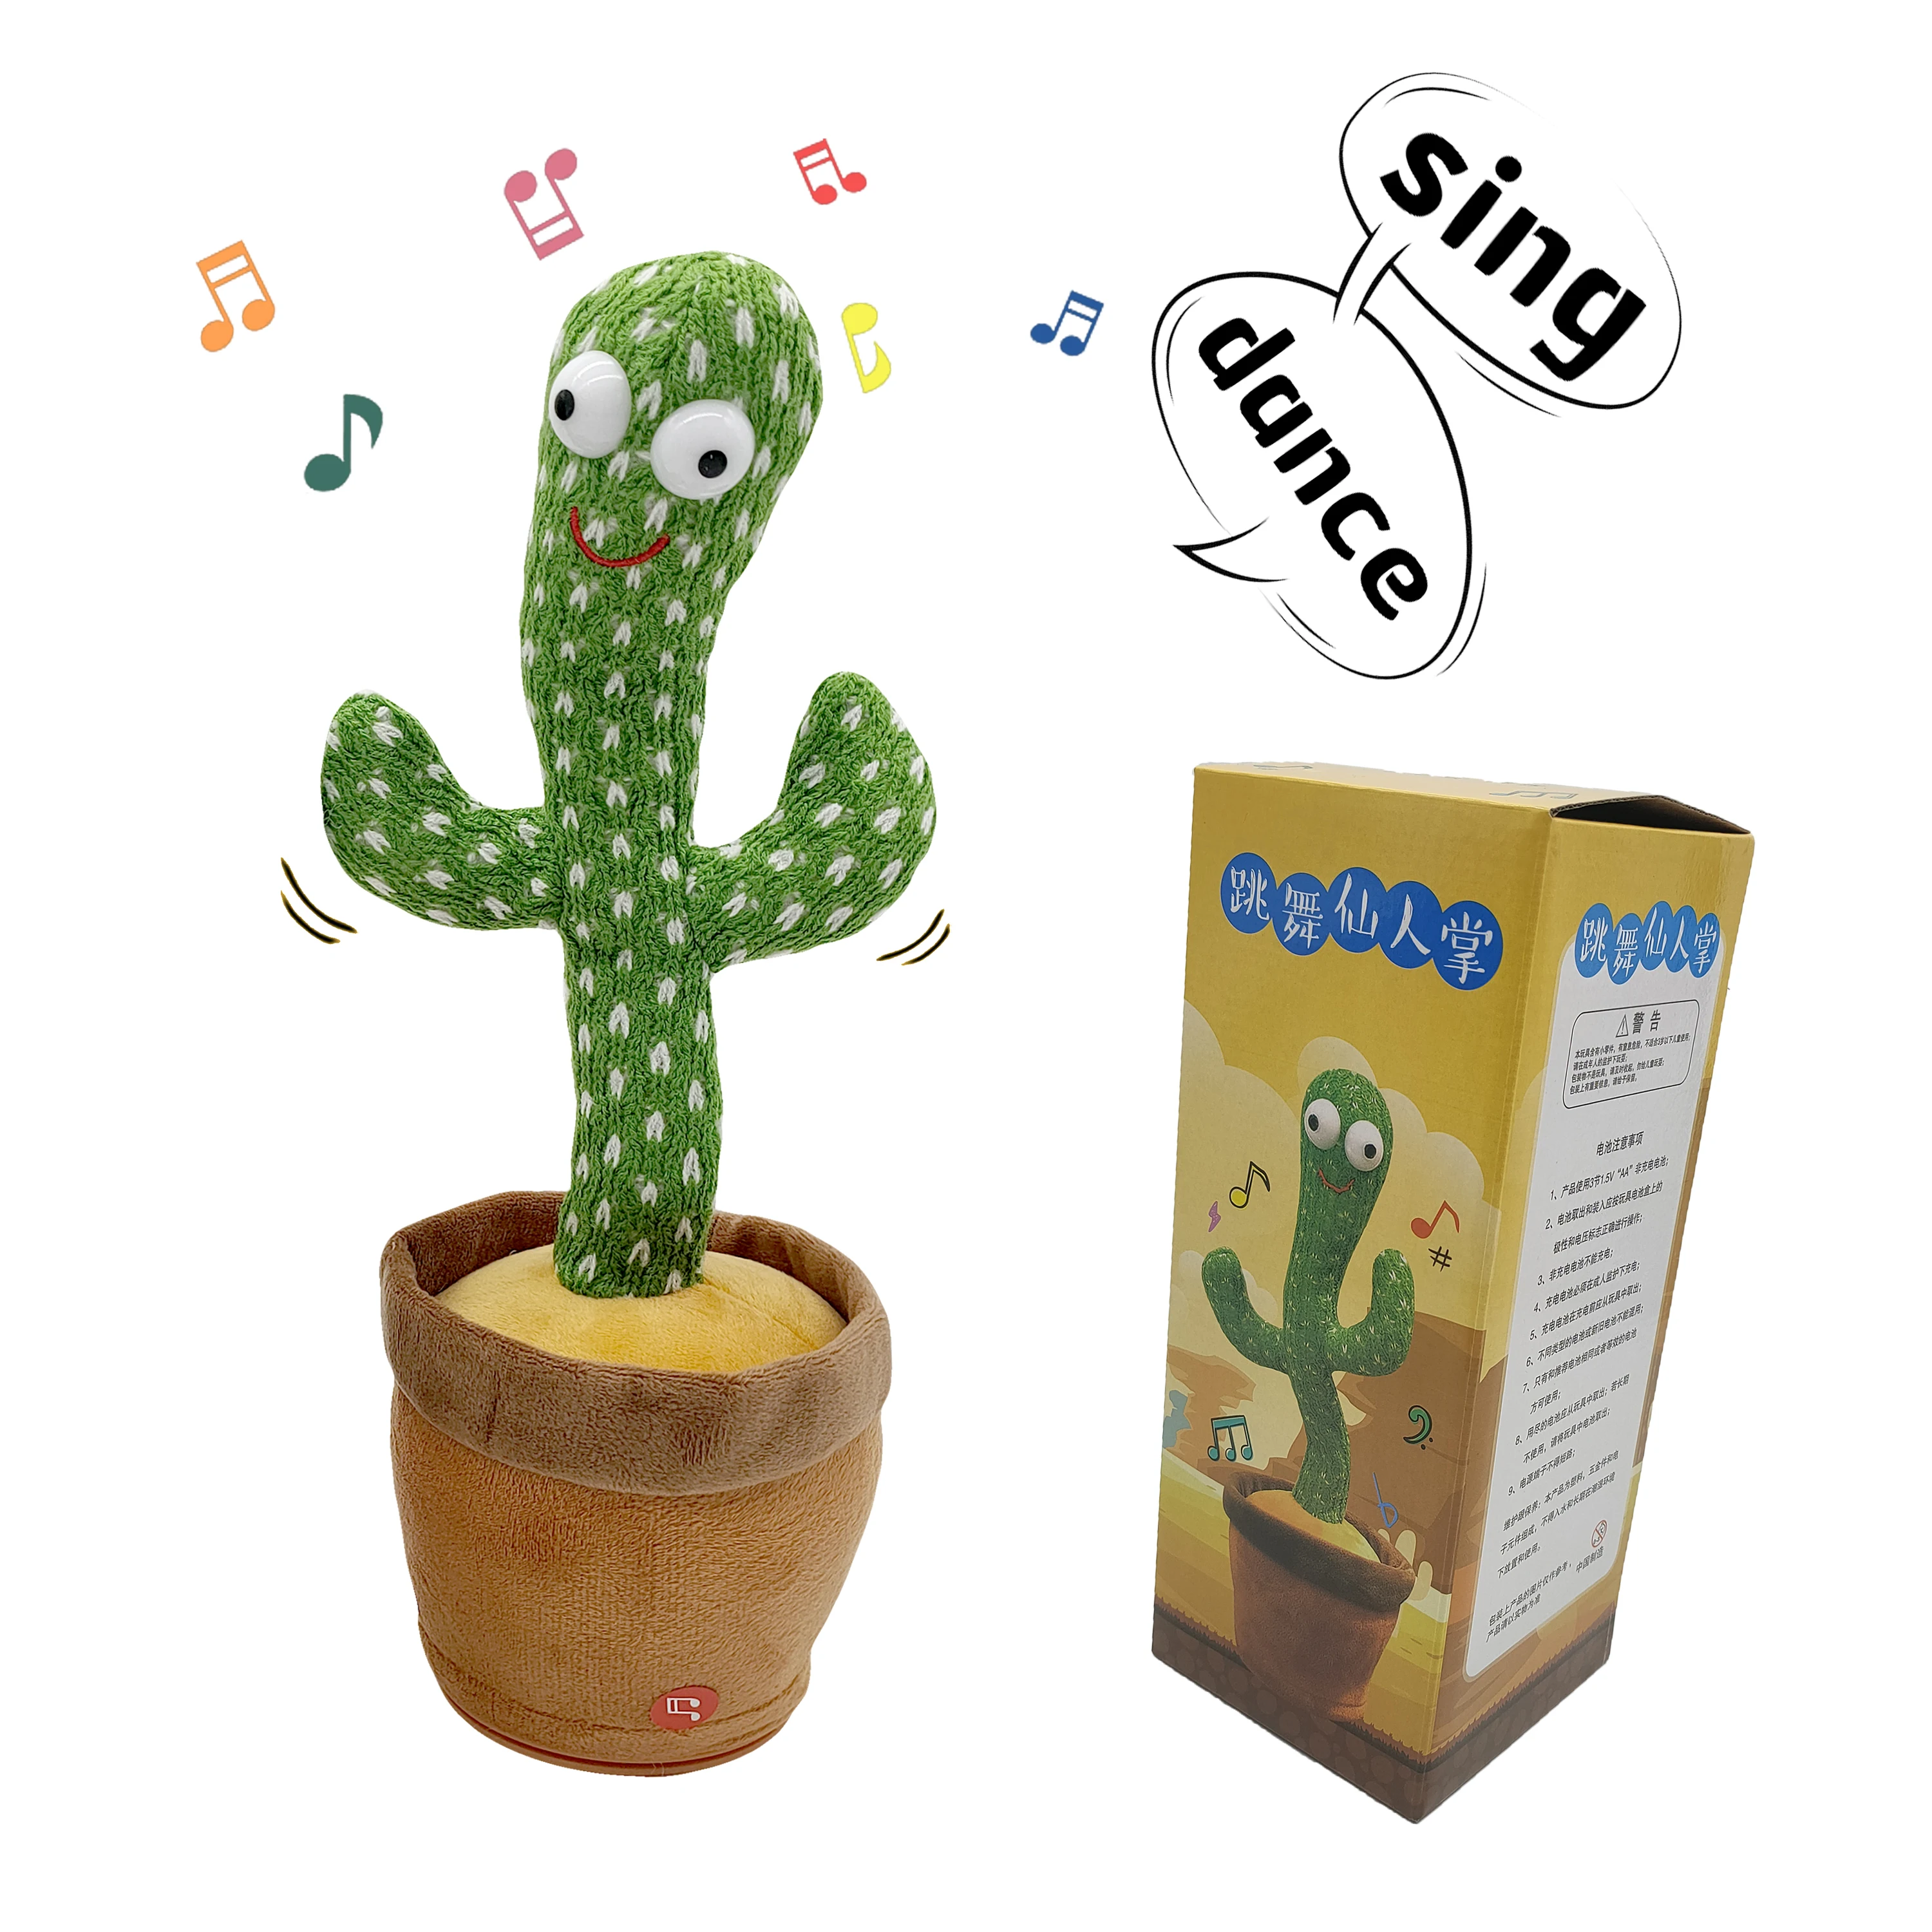 Singing and Glowing Plush Cactus Best Gift for Your Baby Dancing Cactus Toy 120 Songs Repeating and Recording What You Say 